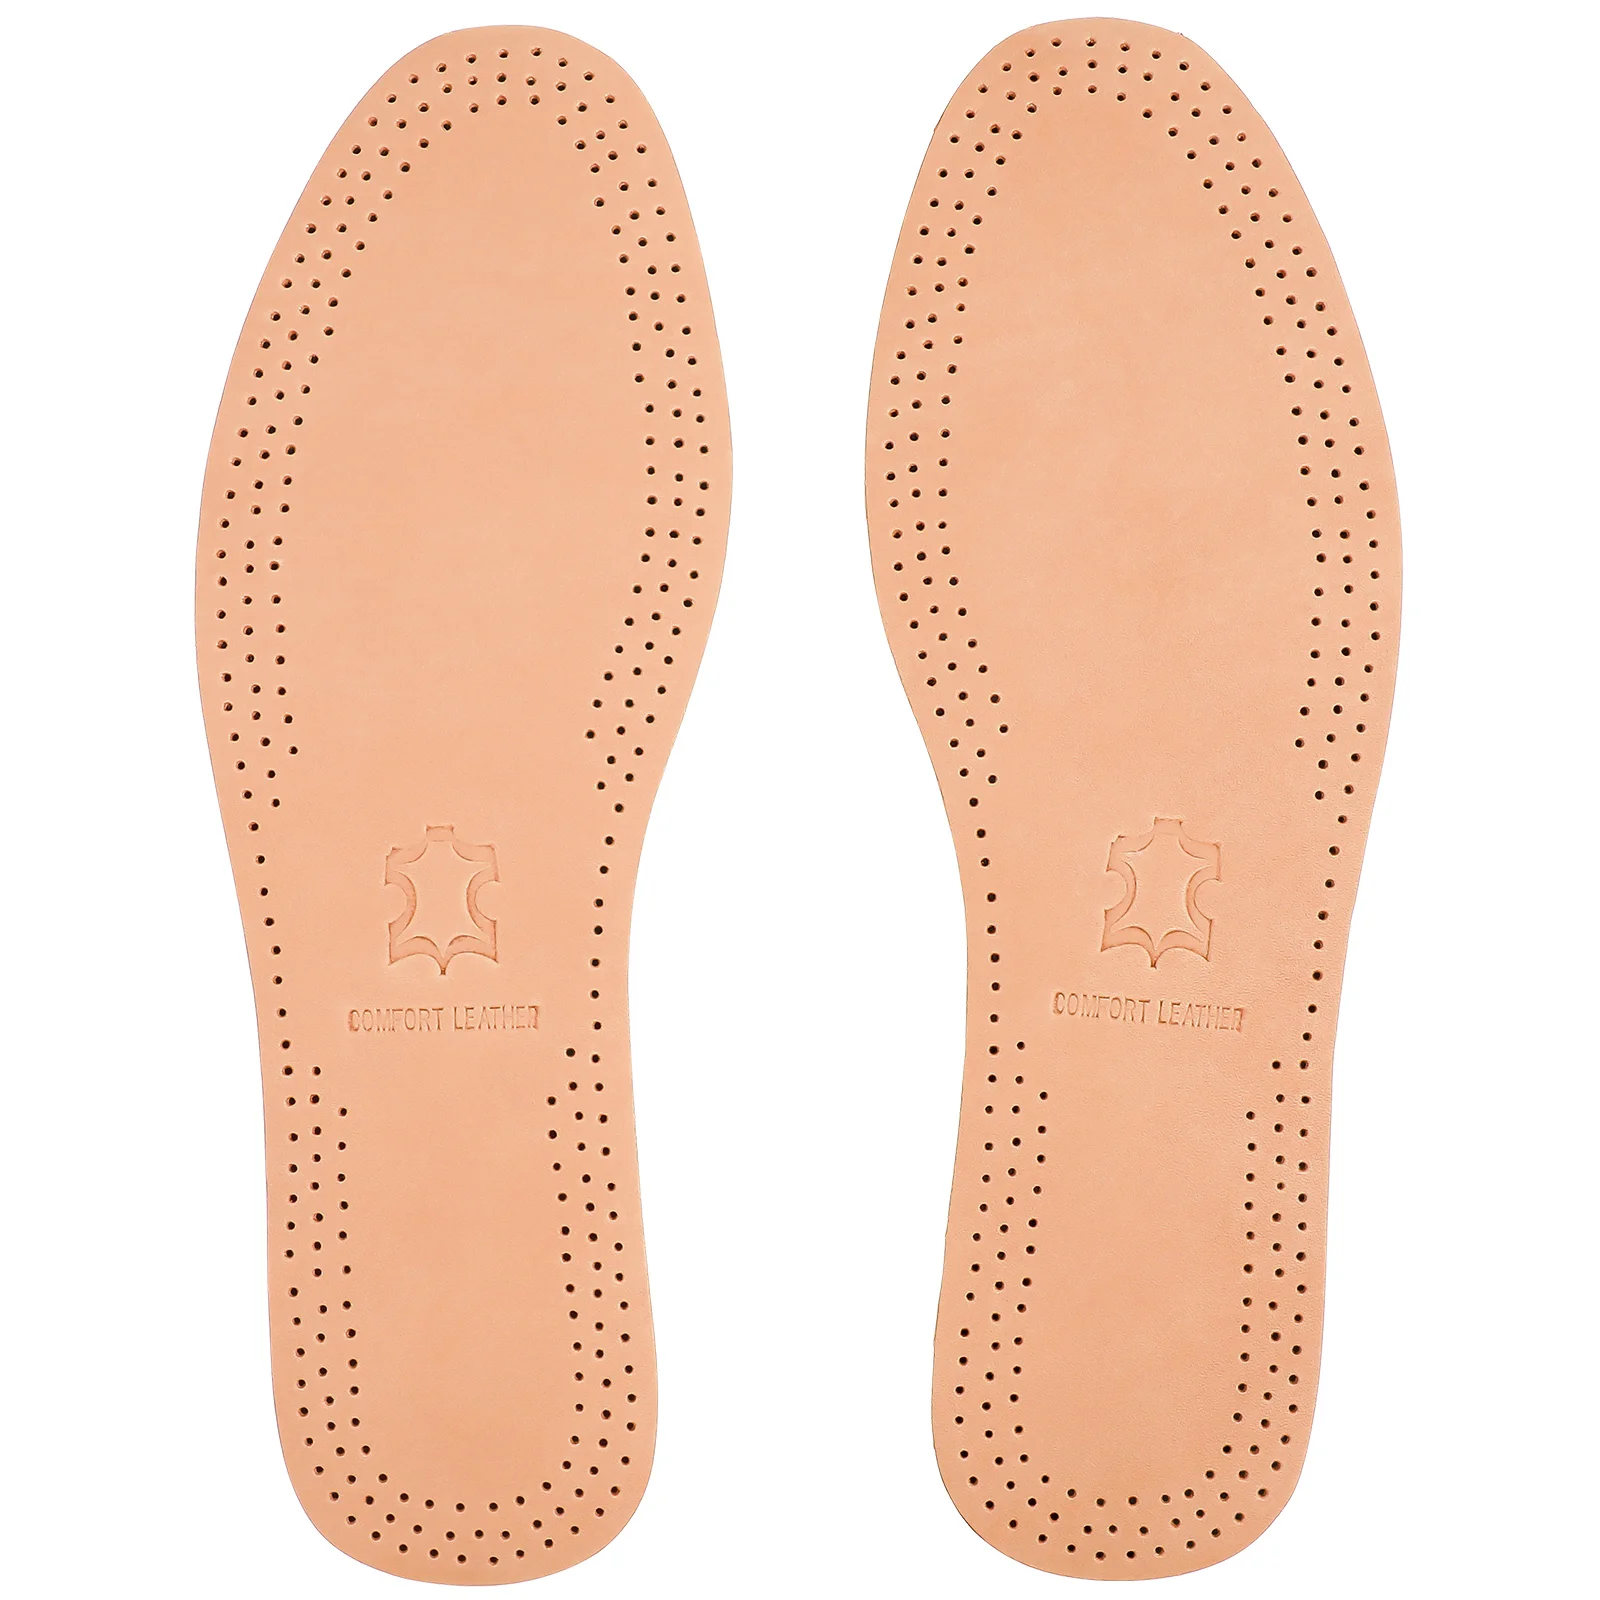 

1 Pair Comfort Insoles Thin Breathable Absorb Sweat Insert Style Latex Insole Pads Size 39-40